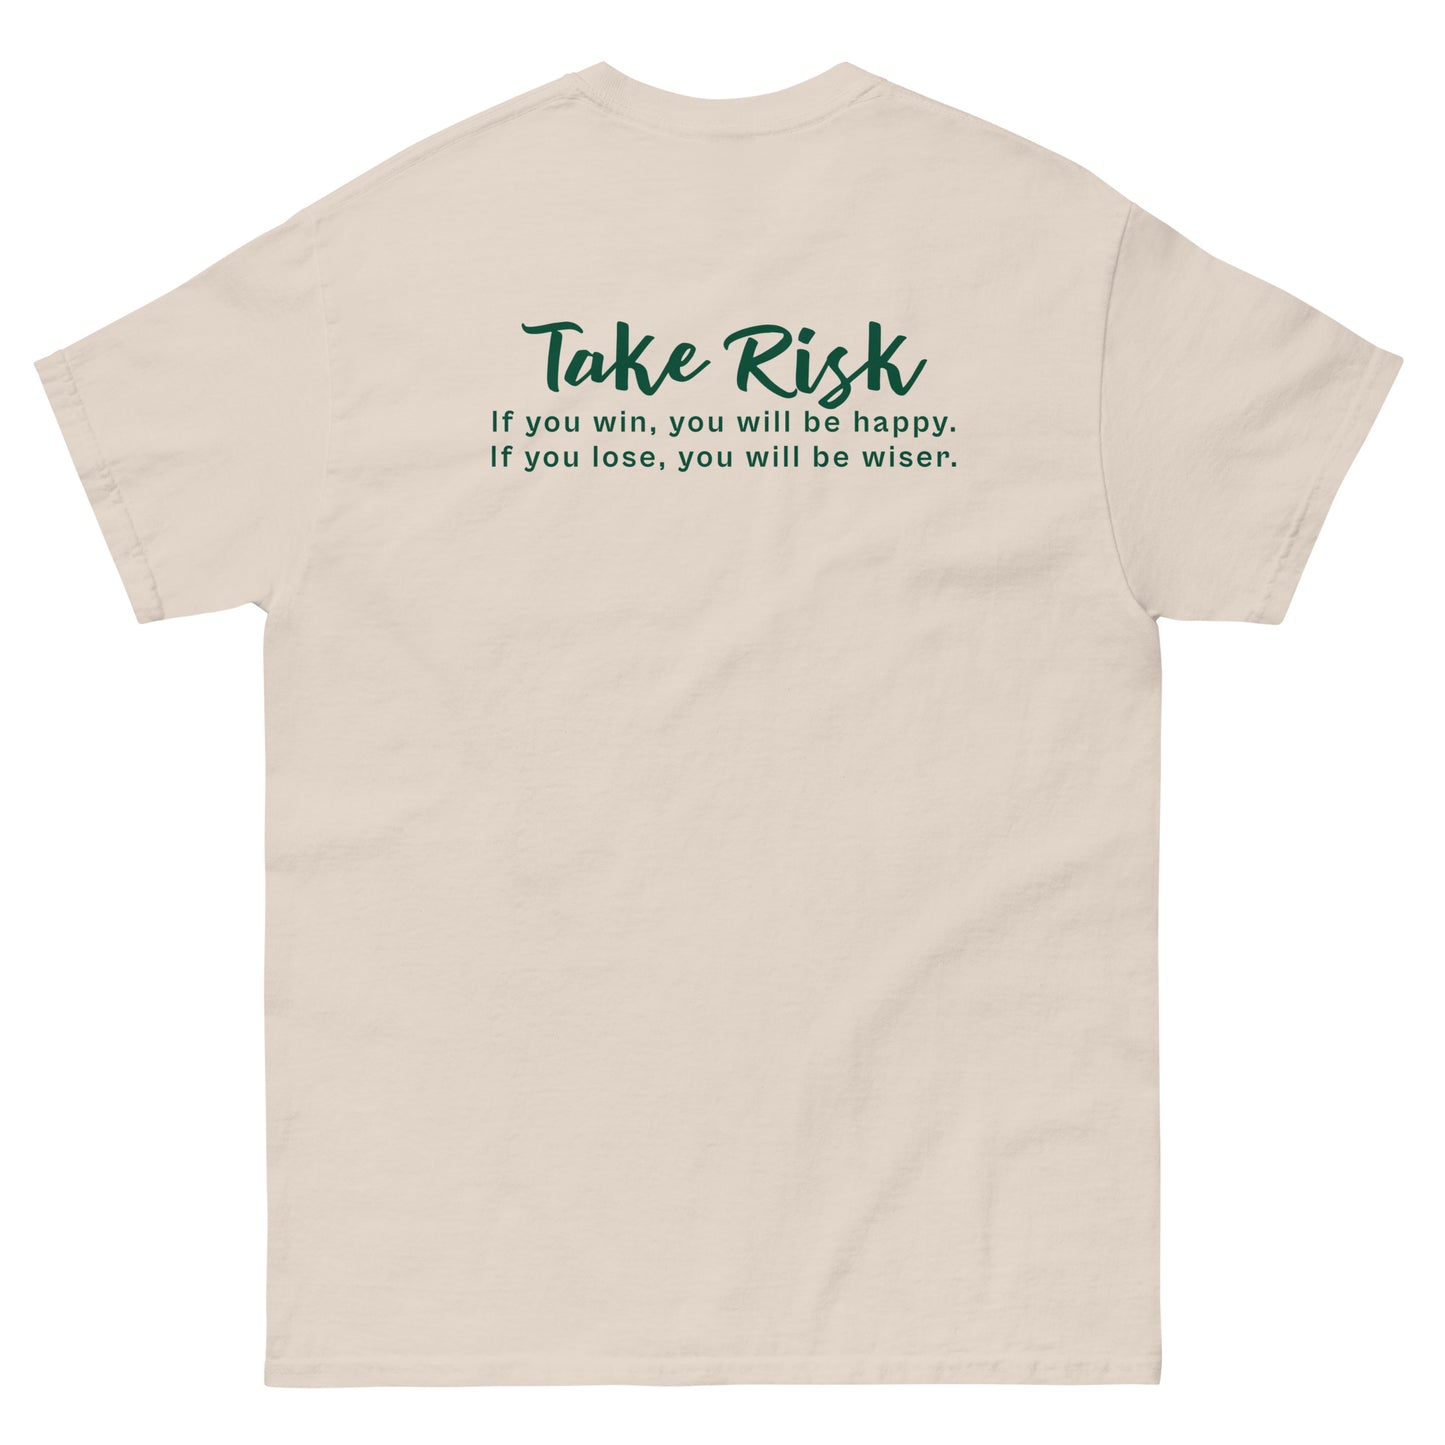 Beige High Quality Tee - Front Design with "Take Risk, if you win you will be happy, if you lose you will be wiser." print and an UFO print on left chest - Back Design with a Phrase "Take Risk, if you win you will be happy, if you lose you will be wiser." print